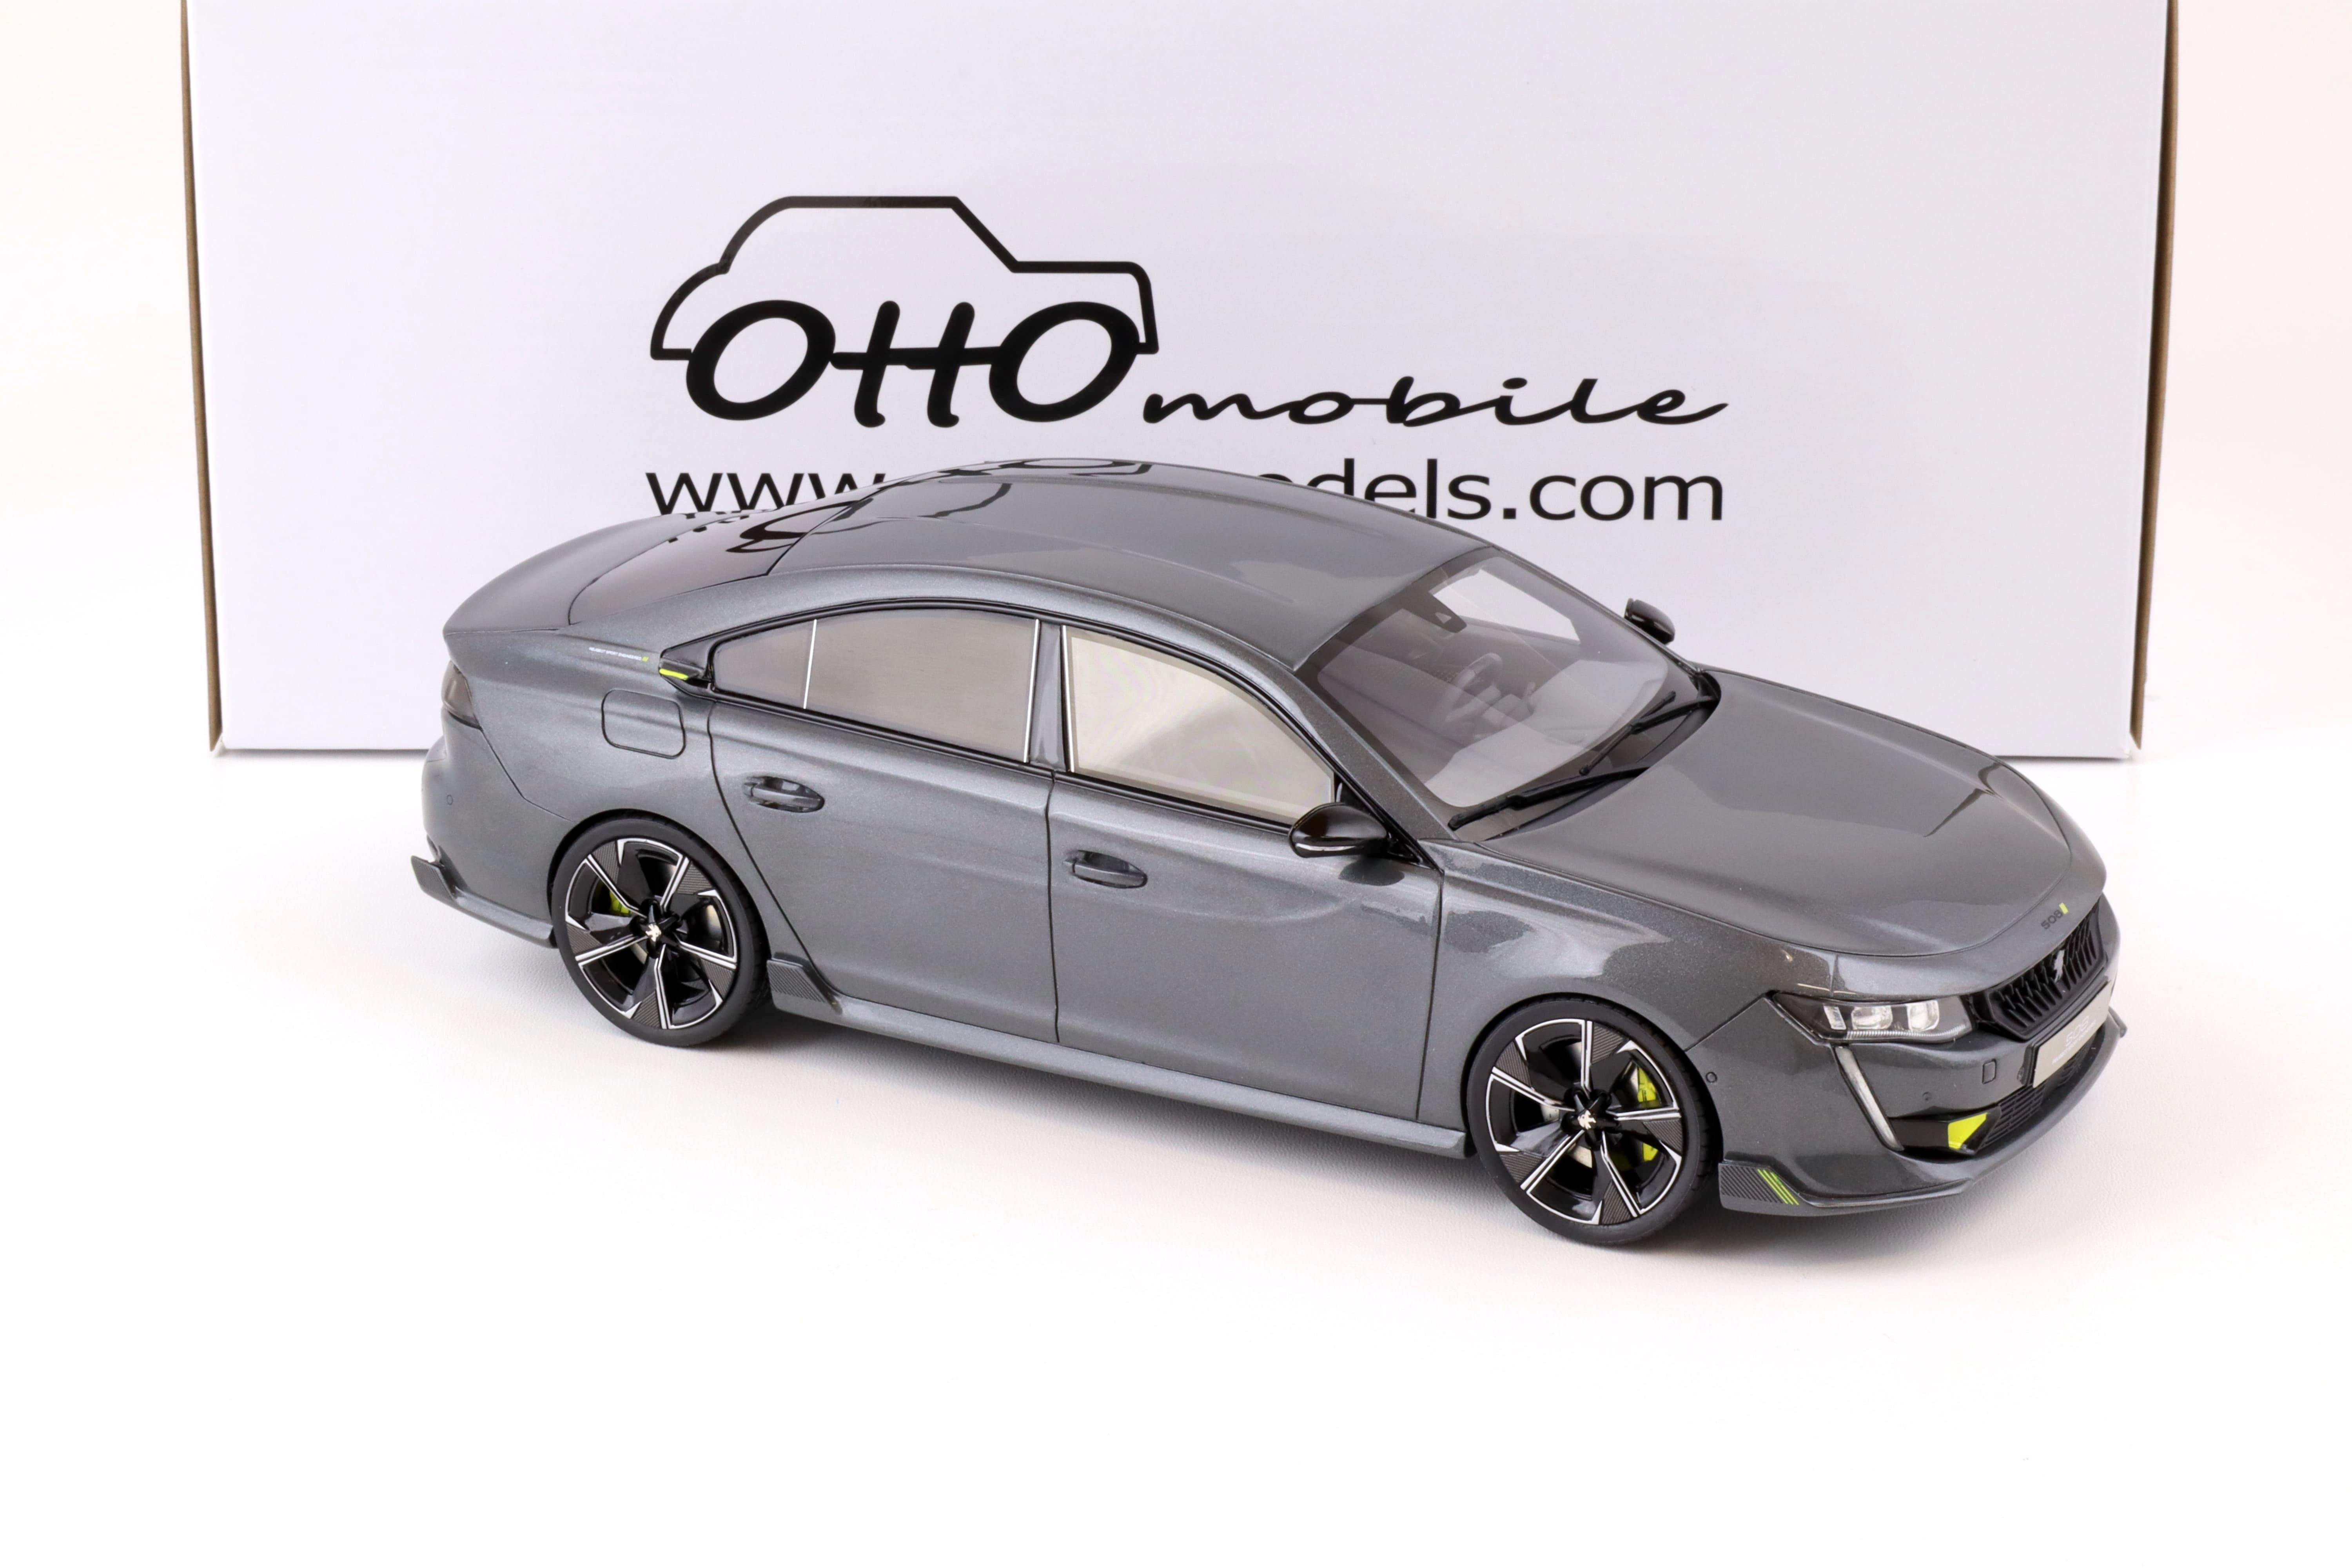 1:18 OTTO mobile OT394 Peugeot 508 Sport Engineered Concept grey 2020